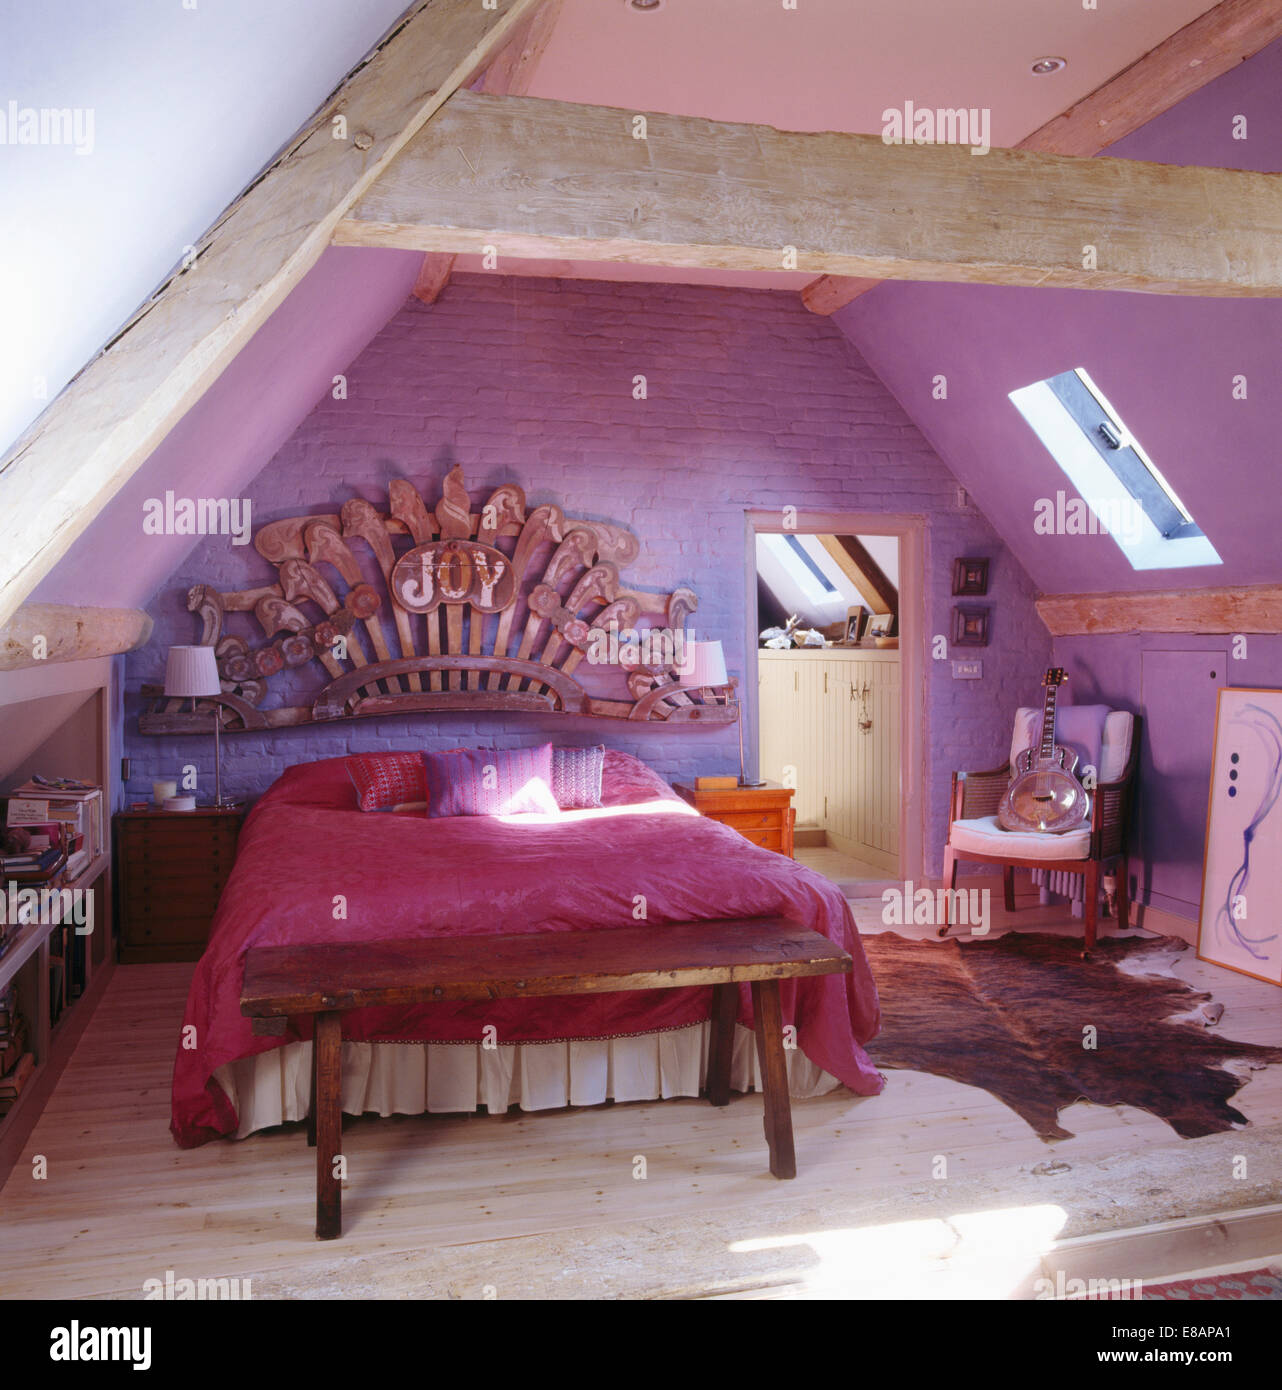 Large wooden carving above bed with pink bedcover in mauve attic bedroom Stock Photo